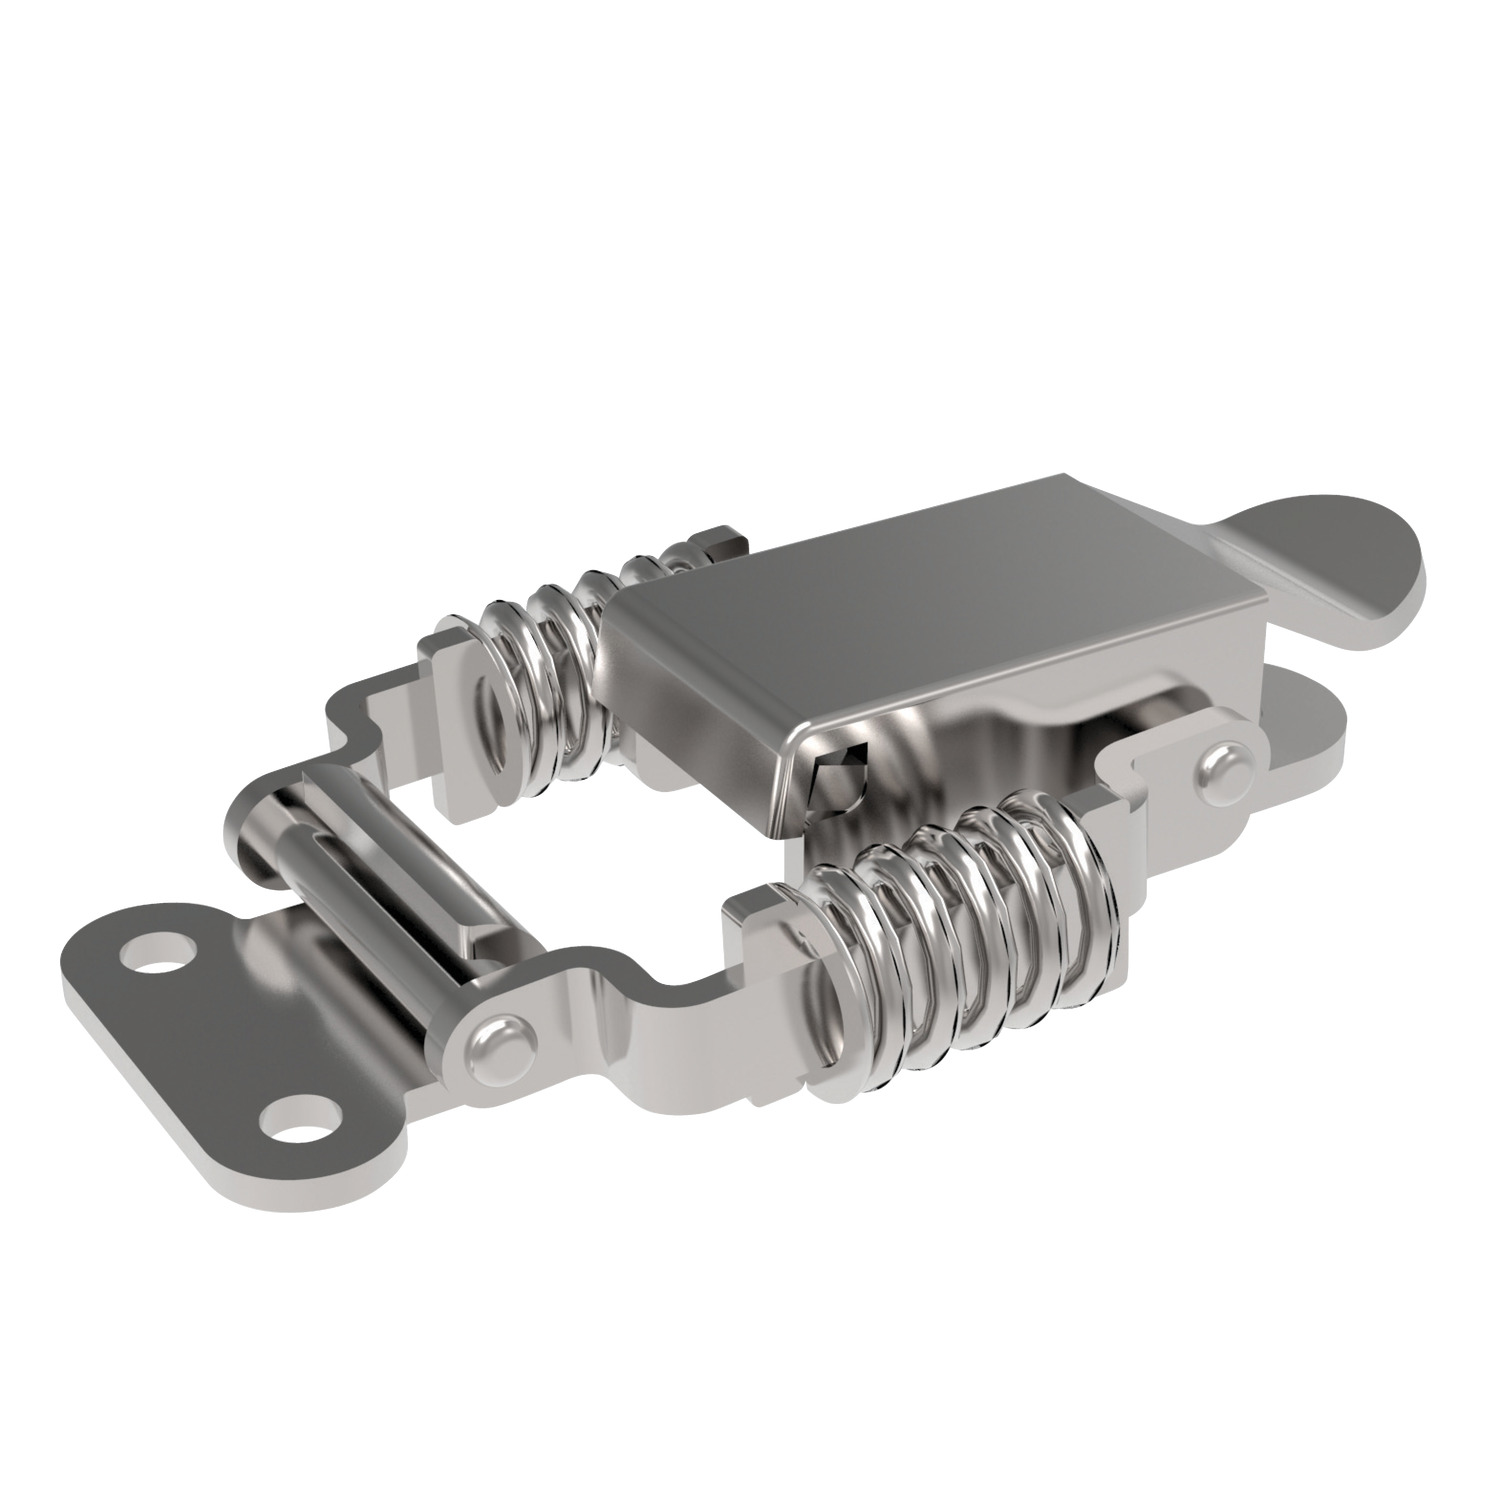 Toggle Latches Designed for industrial equipment such as container trucks, medical and instrument equipment. The Spring function make this especially suited to equipment susceptible to vibration.